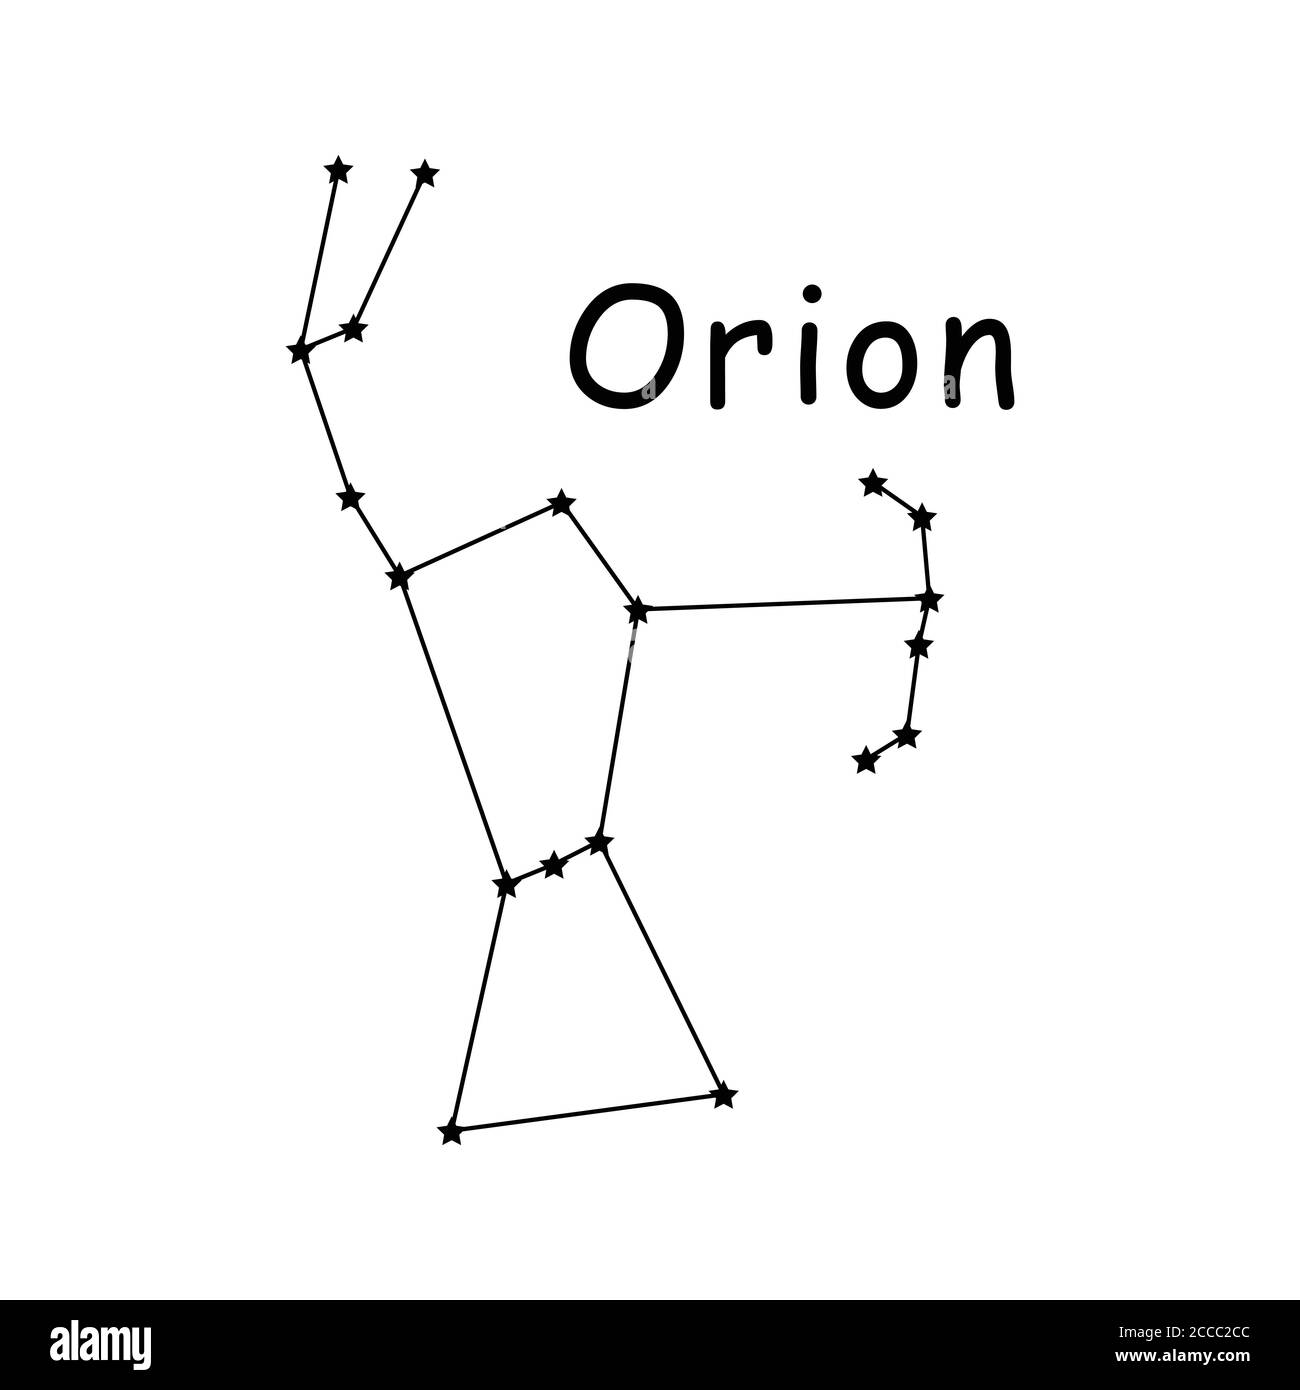 Orion Constellation Stars Vector Icon Pictogram with Description Text. Artwork Depicting the Orion Constellation Greek Mythology. Stock Vector